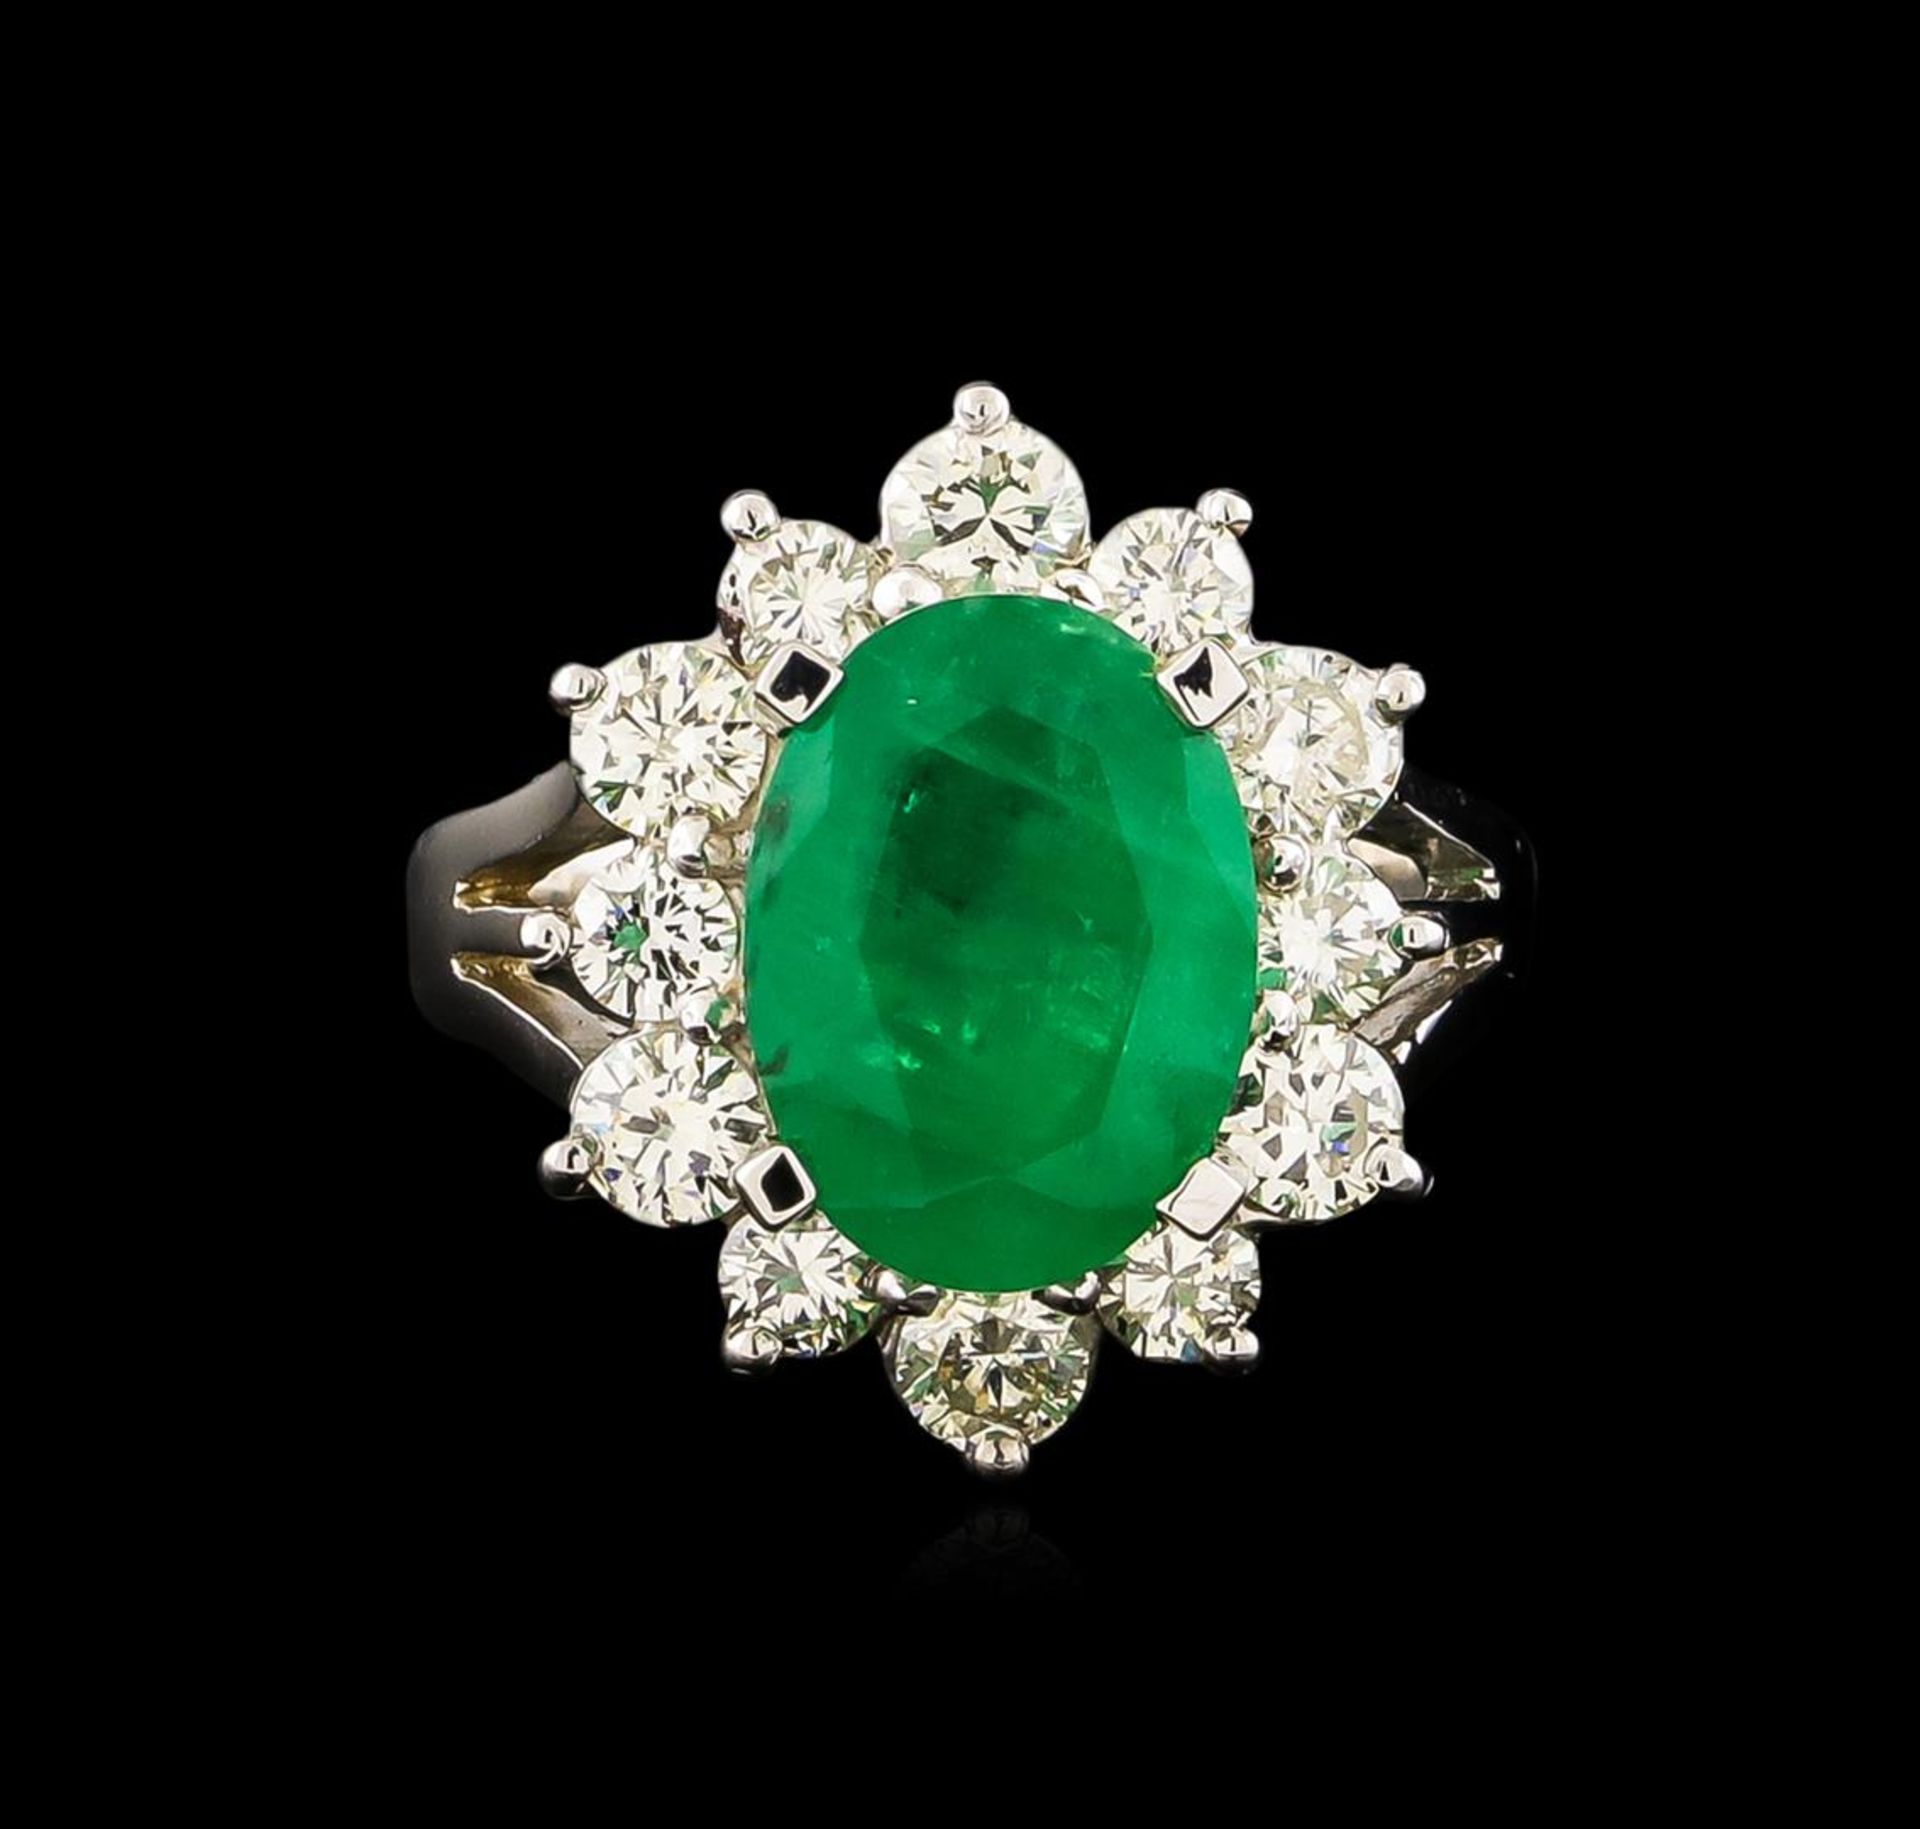 14KT White Gold 3.41 ctw Emerald and Diamond Ring - Image 2 of 5